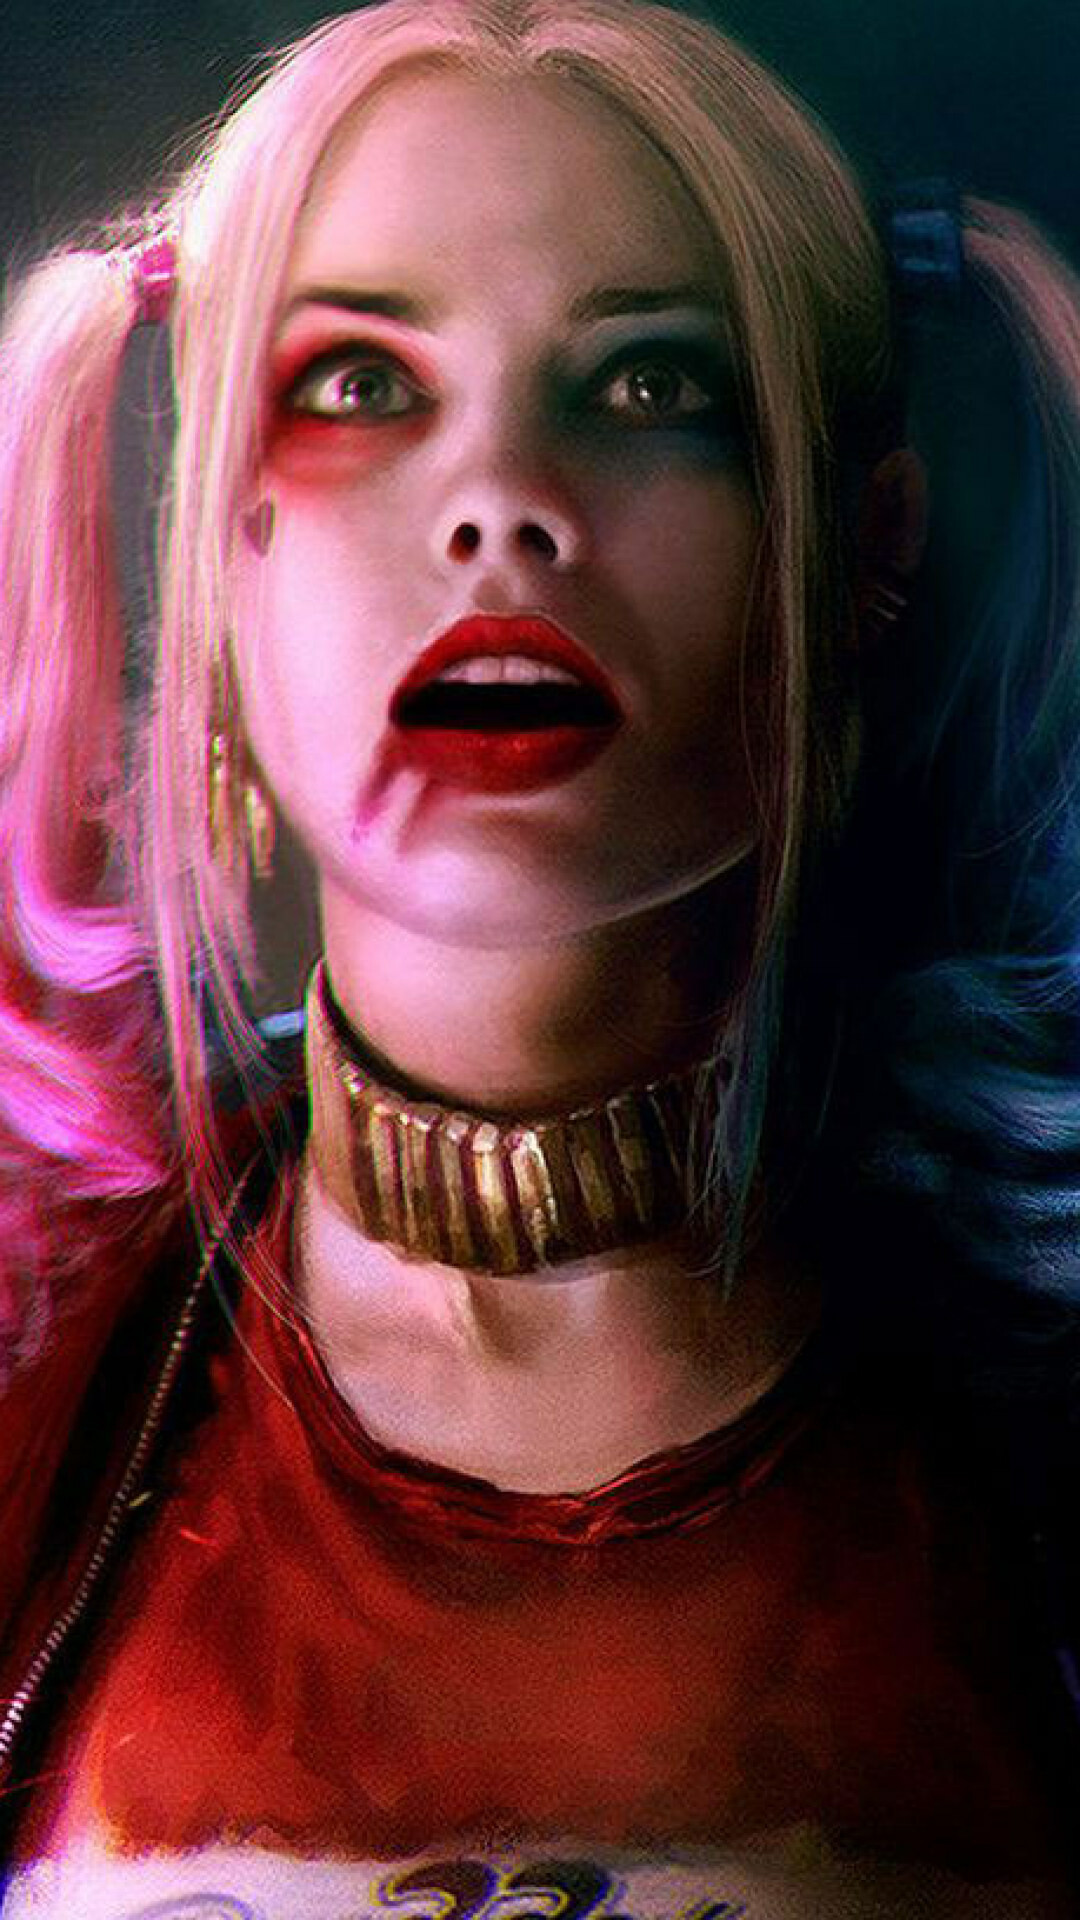 Suicide Squad: Harley Quinn is seen as both a ruthless villain undeserving of sympathy and a tragic character. 1080x1920 Full HD Background.